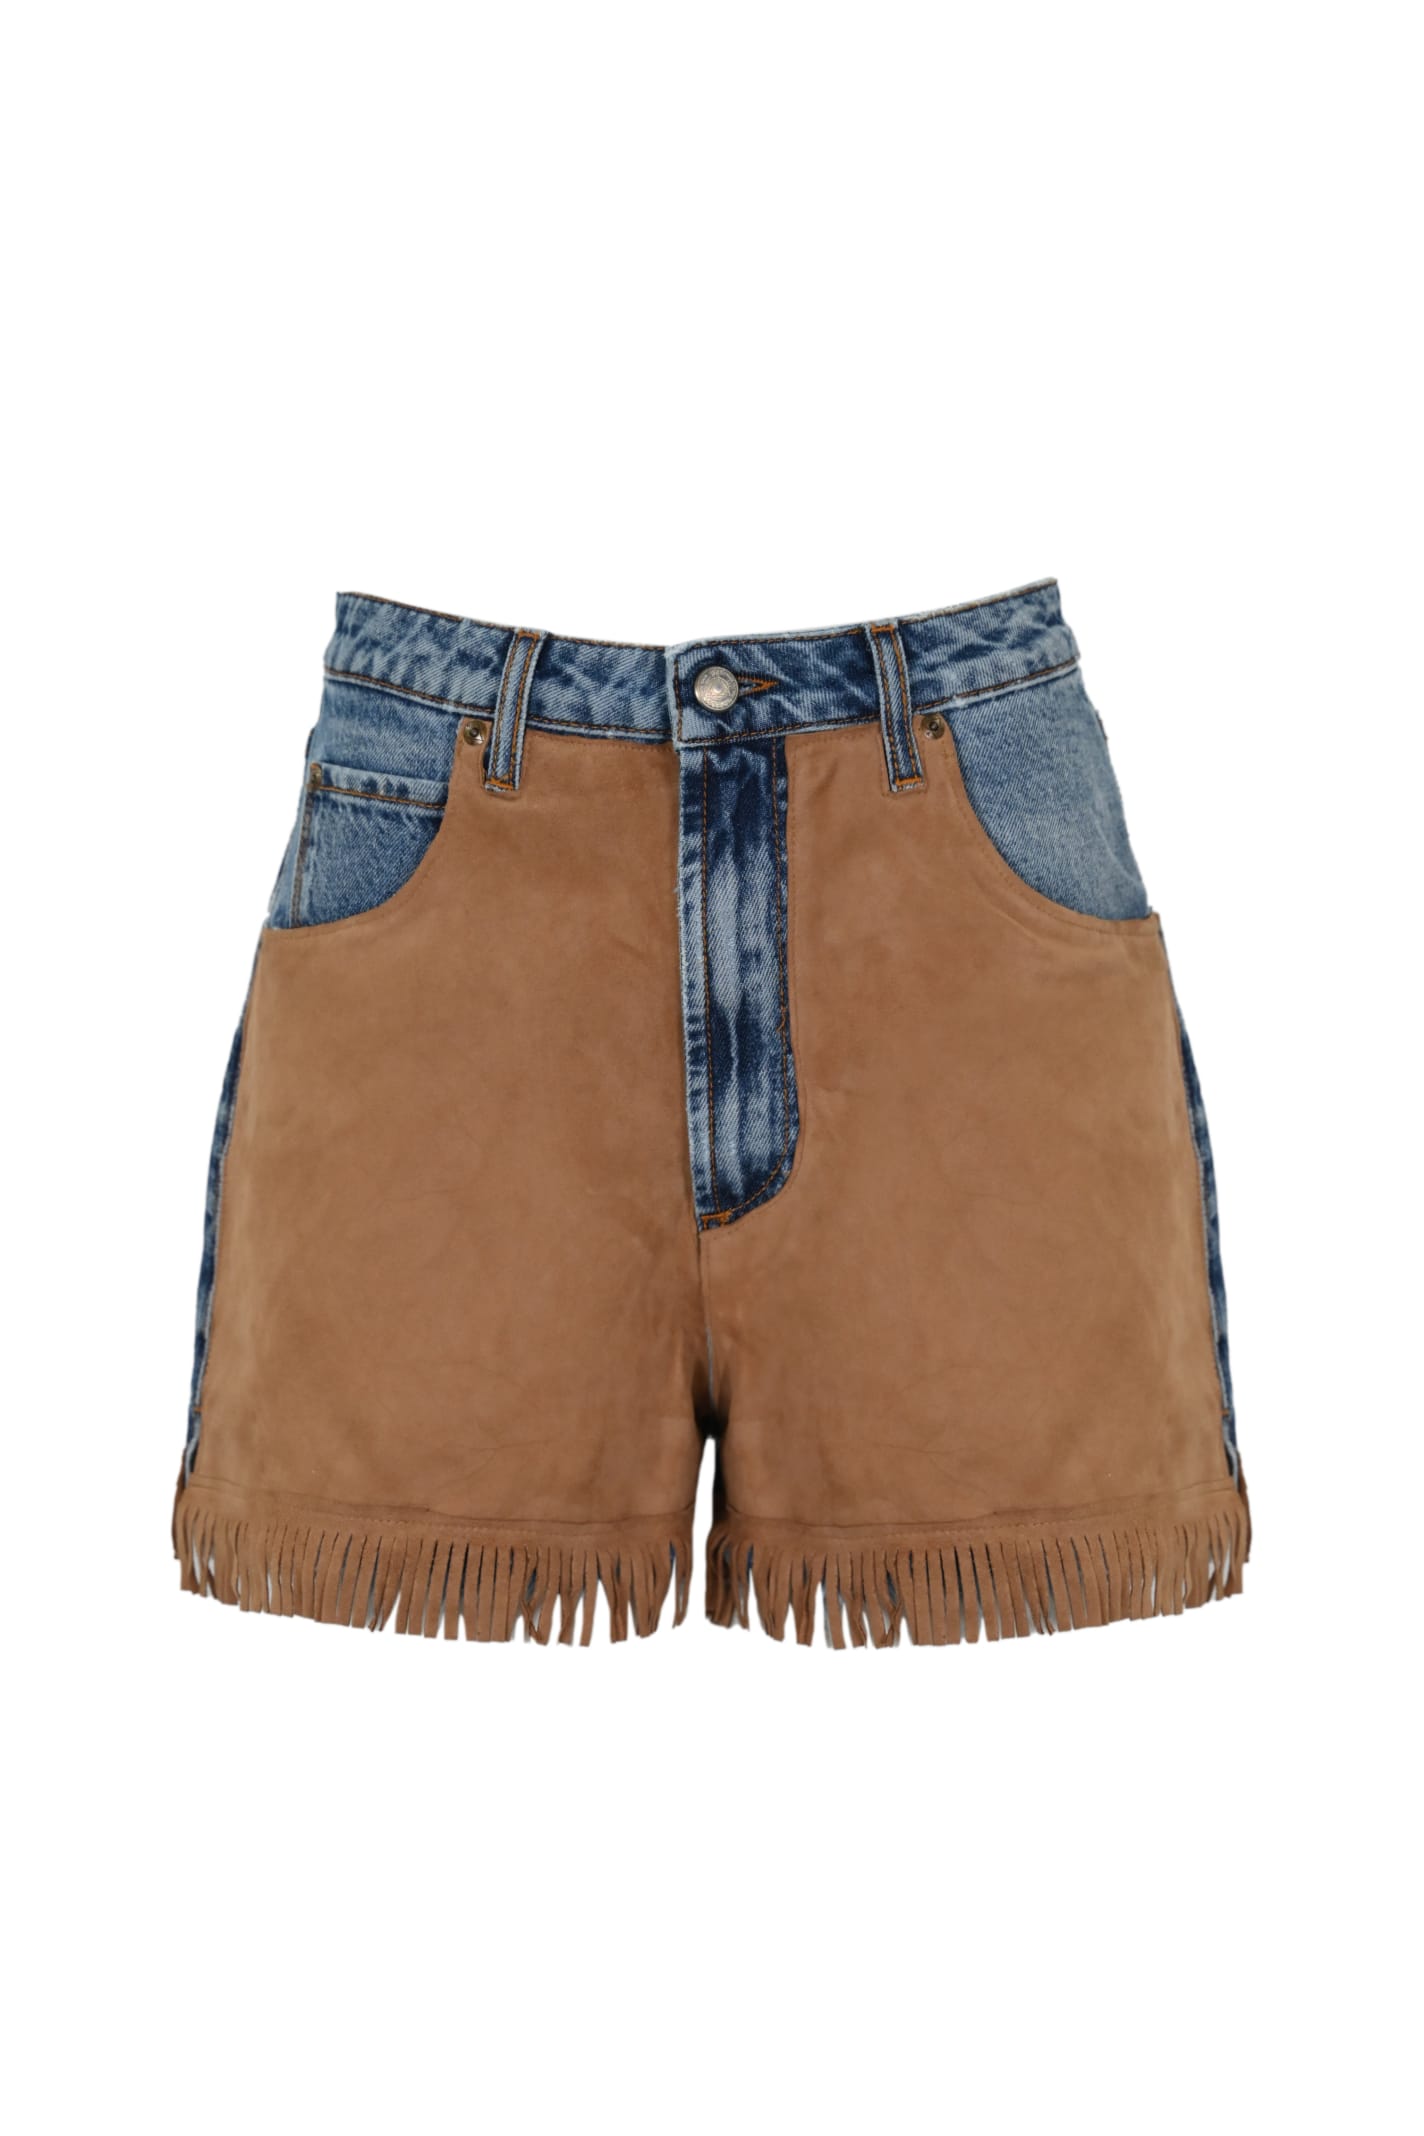 Roy Rogers Denim And Suede Shorts